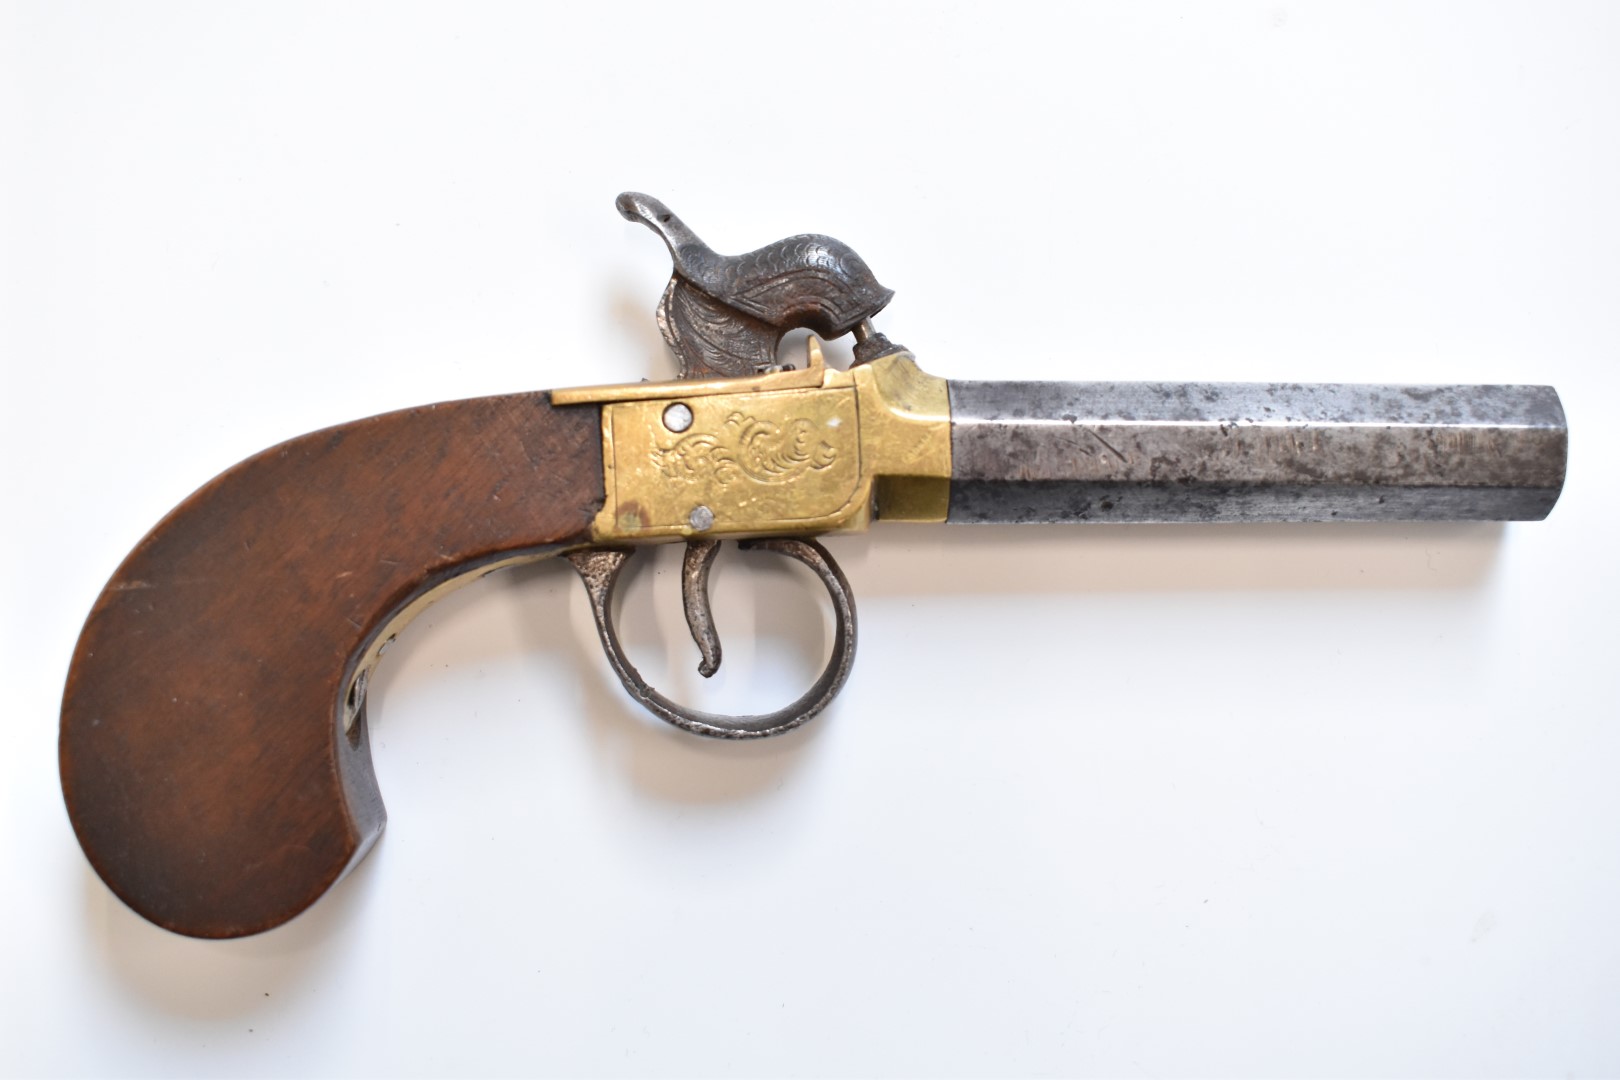 Unnamed single barrel percussion hammer action pocket pistol with engraved brass frame and top